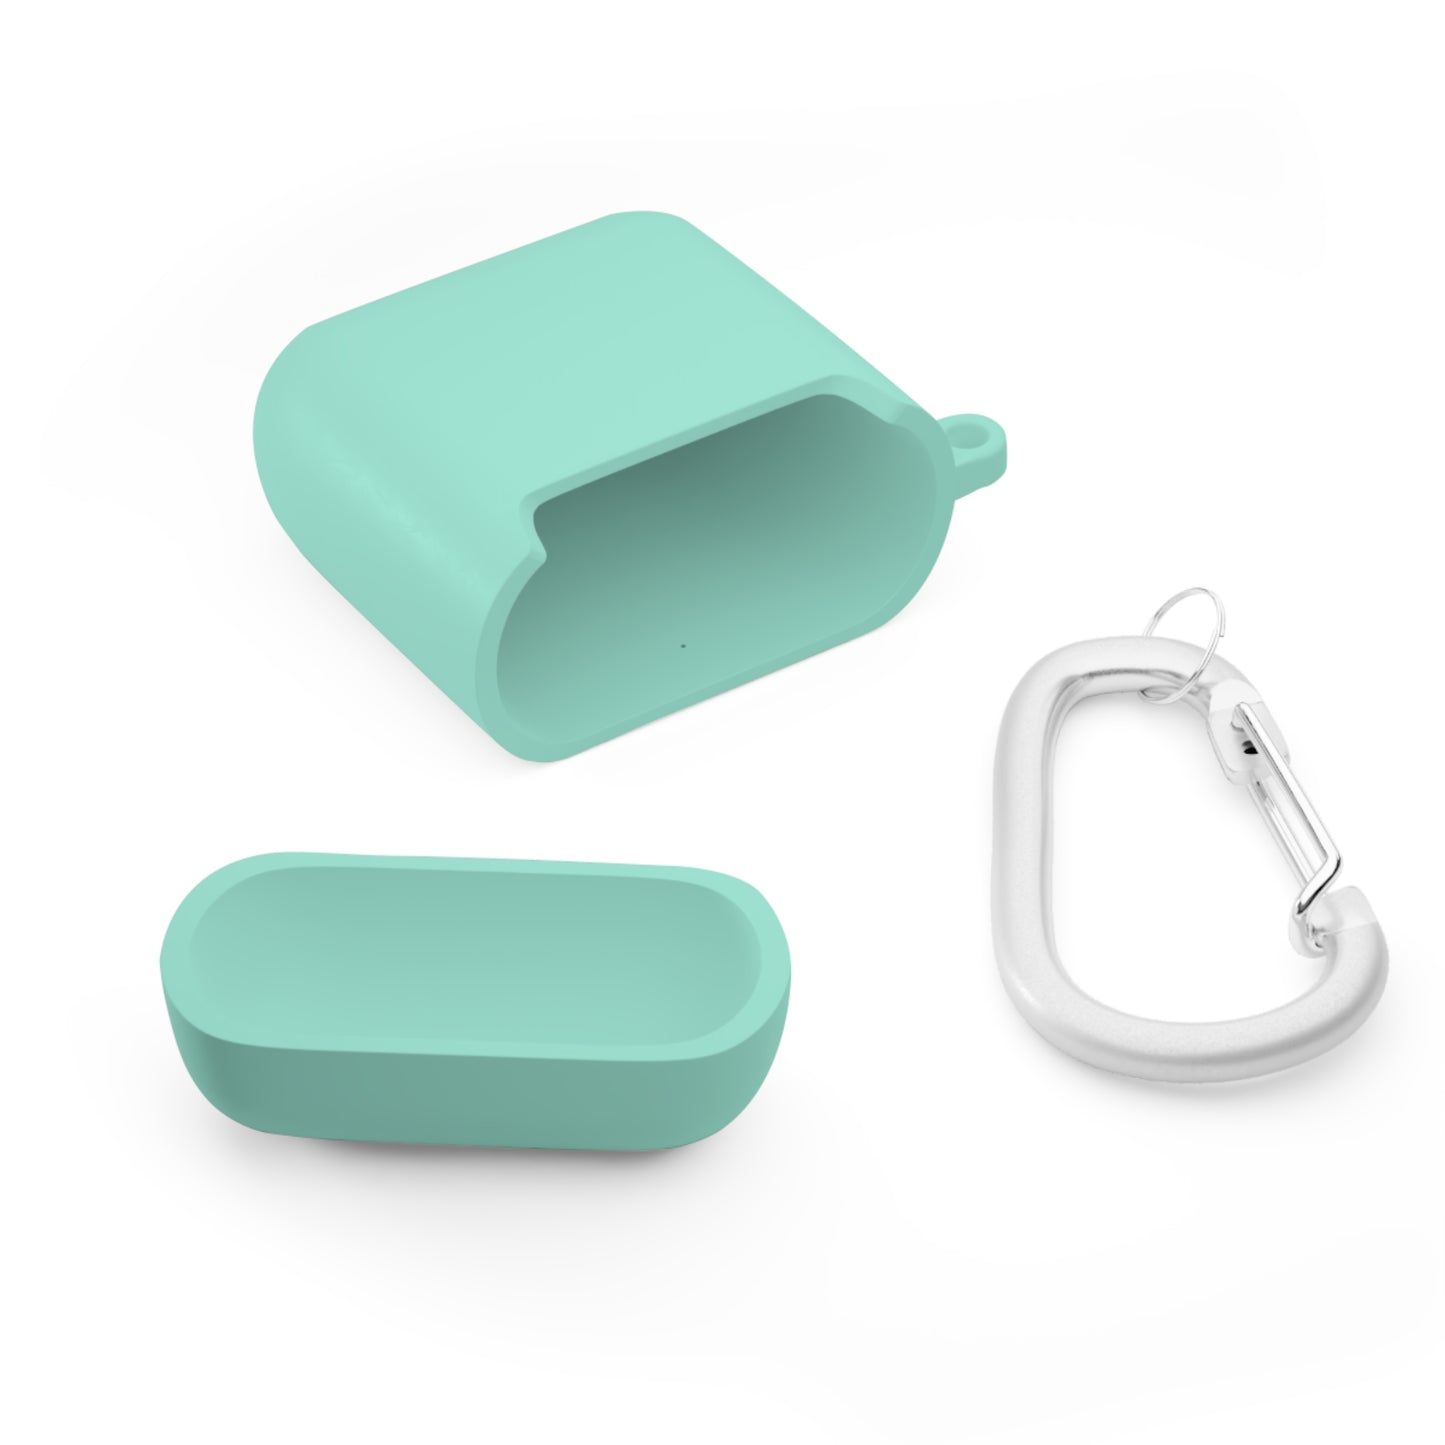 God Above All Things Airpod / Airpods Pro Case cover